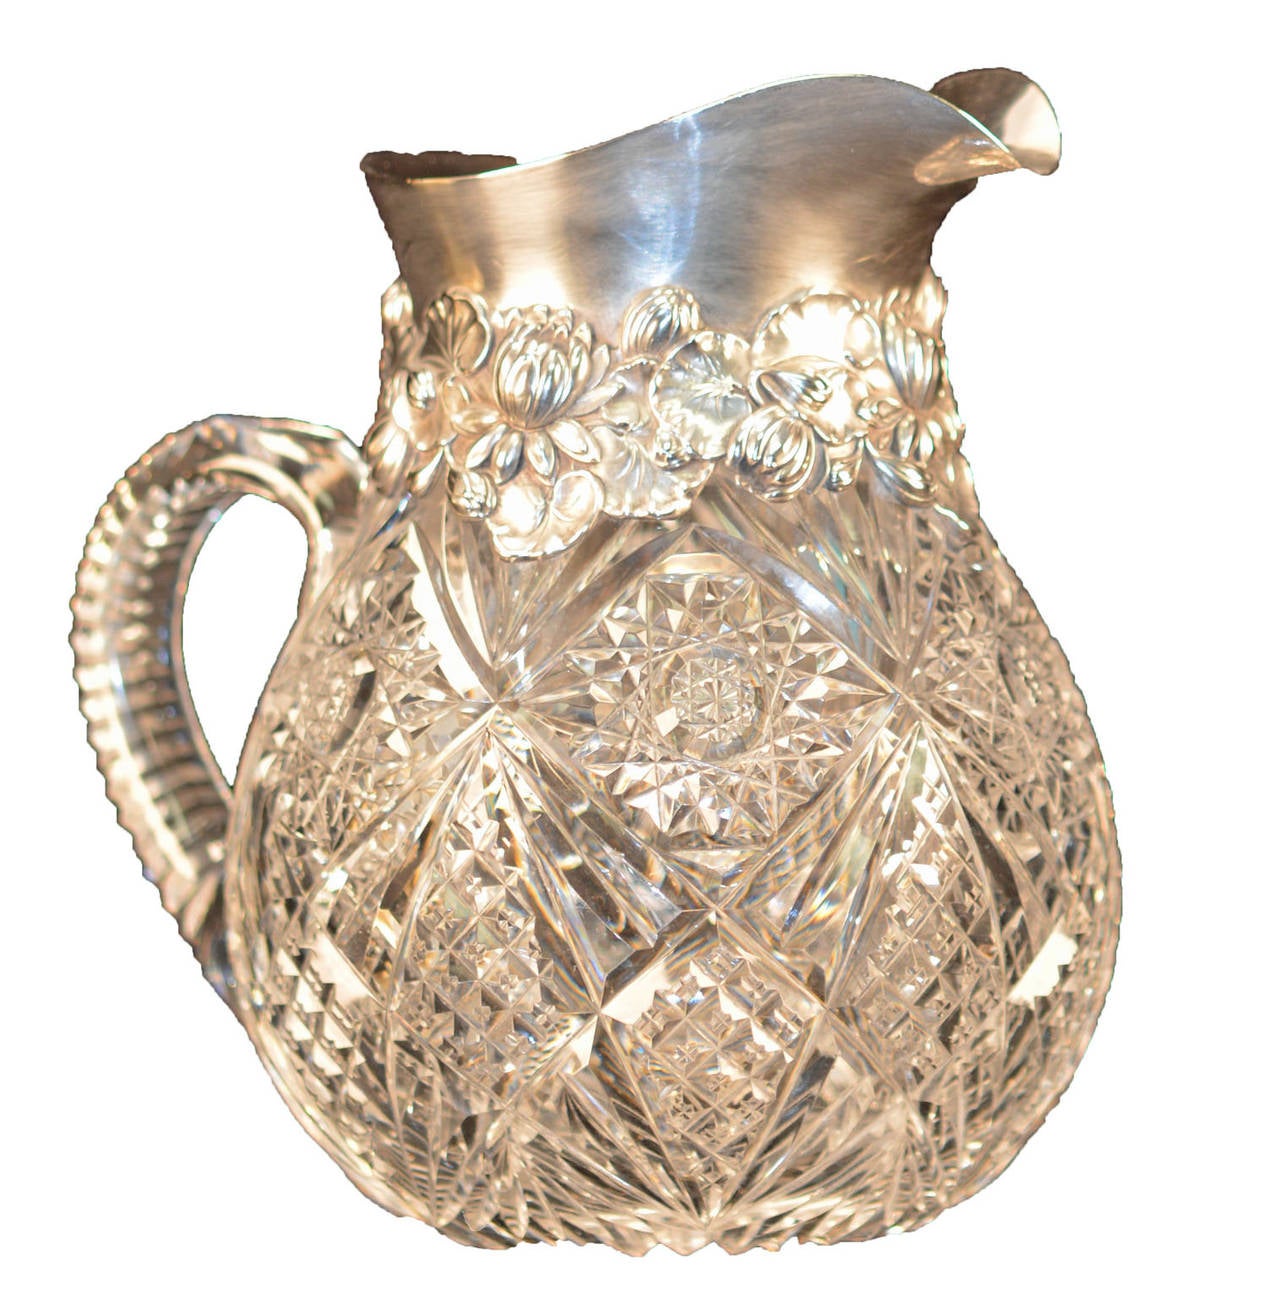 American brilliant period cut-glass pitcher with large Gorham sterling mount. Rayed hobstars with strawberry diamond, and fan cover the body. Notched handle and rayed base. Large heavy sterling rim with Art Nouveau water lilies and leaves. Gorham